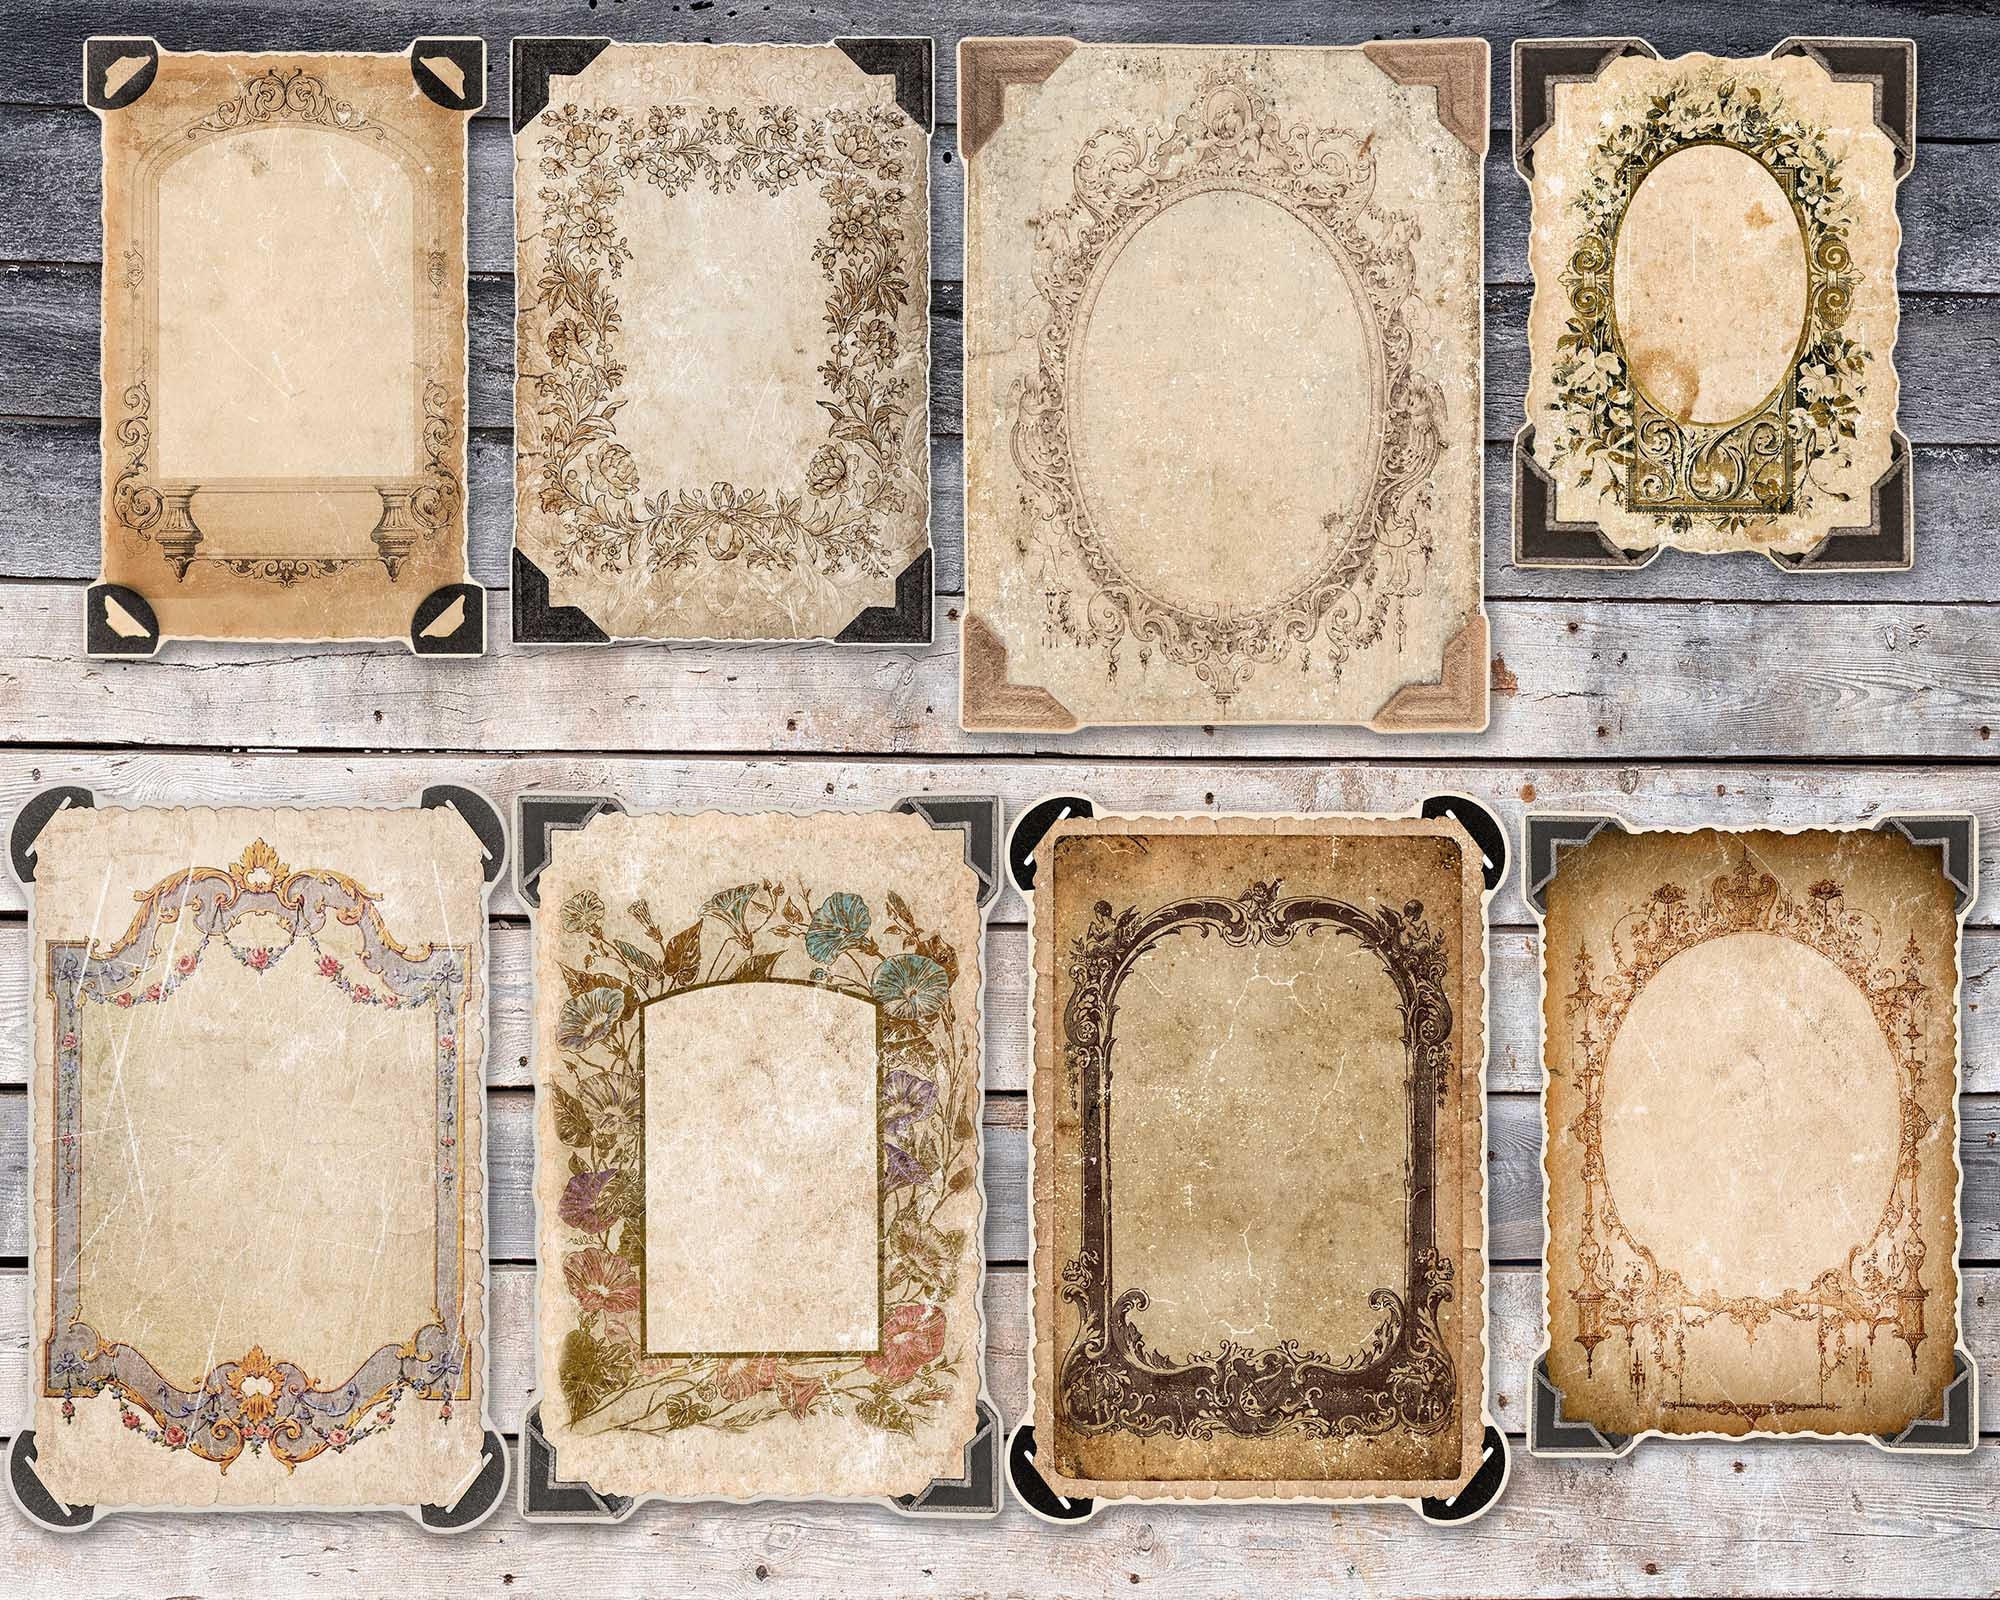 Scrapbooking set - old paper, photo fram Stock Vector by